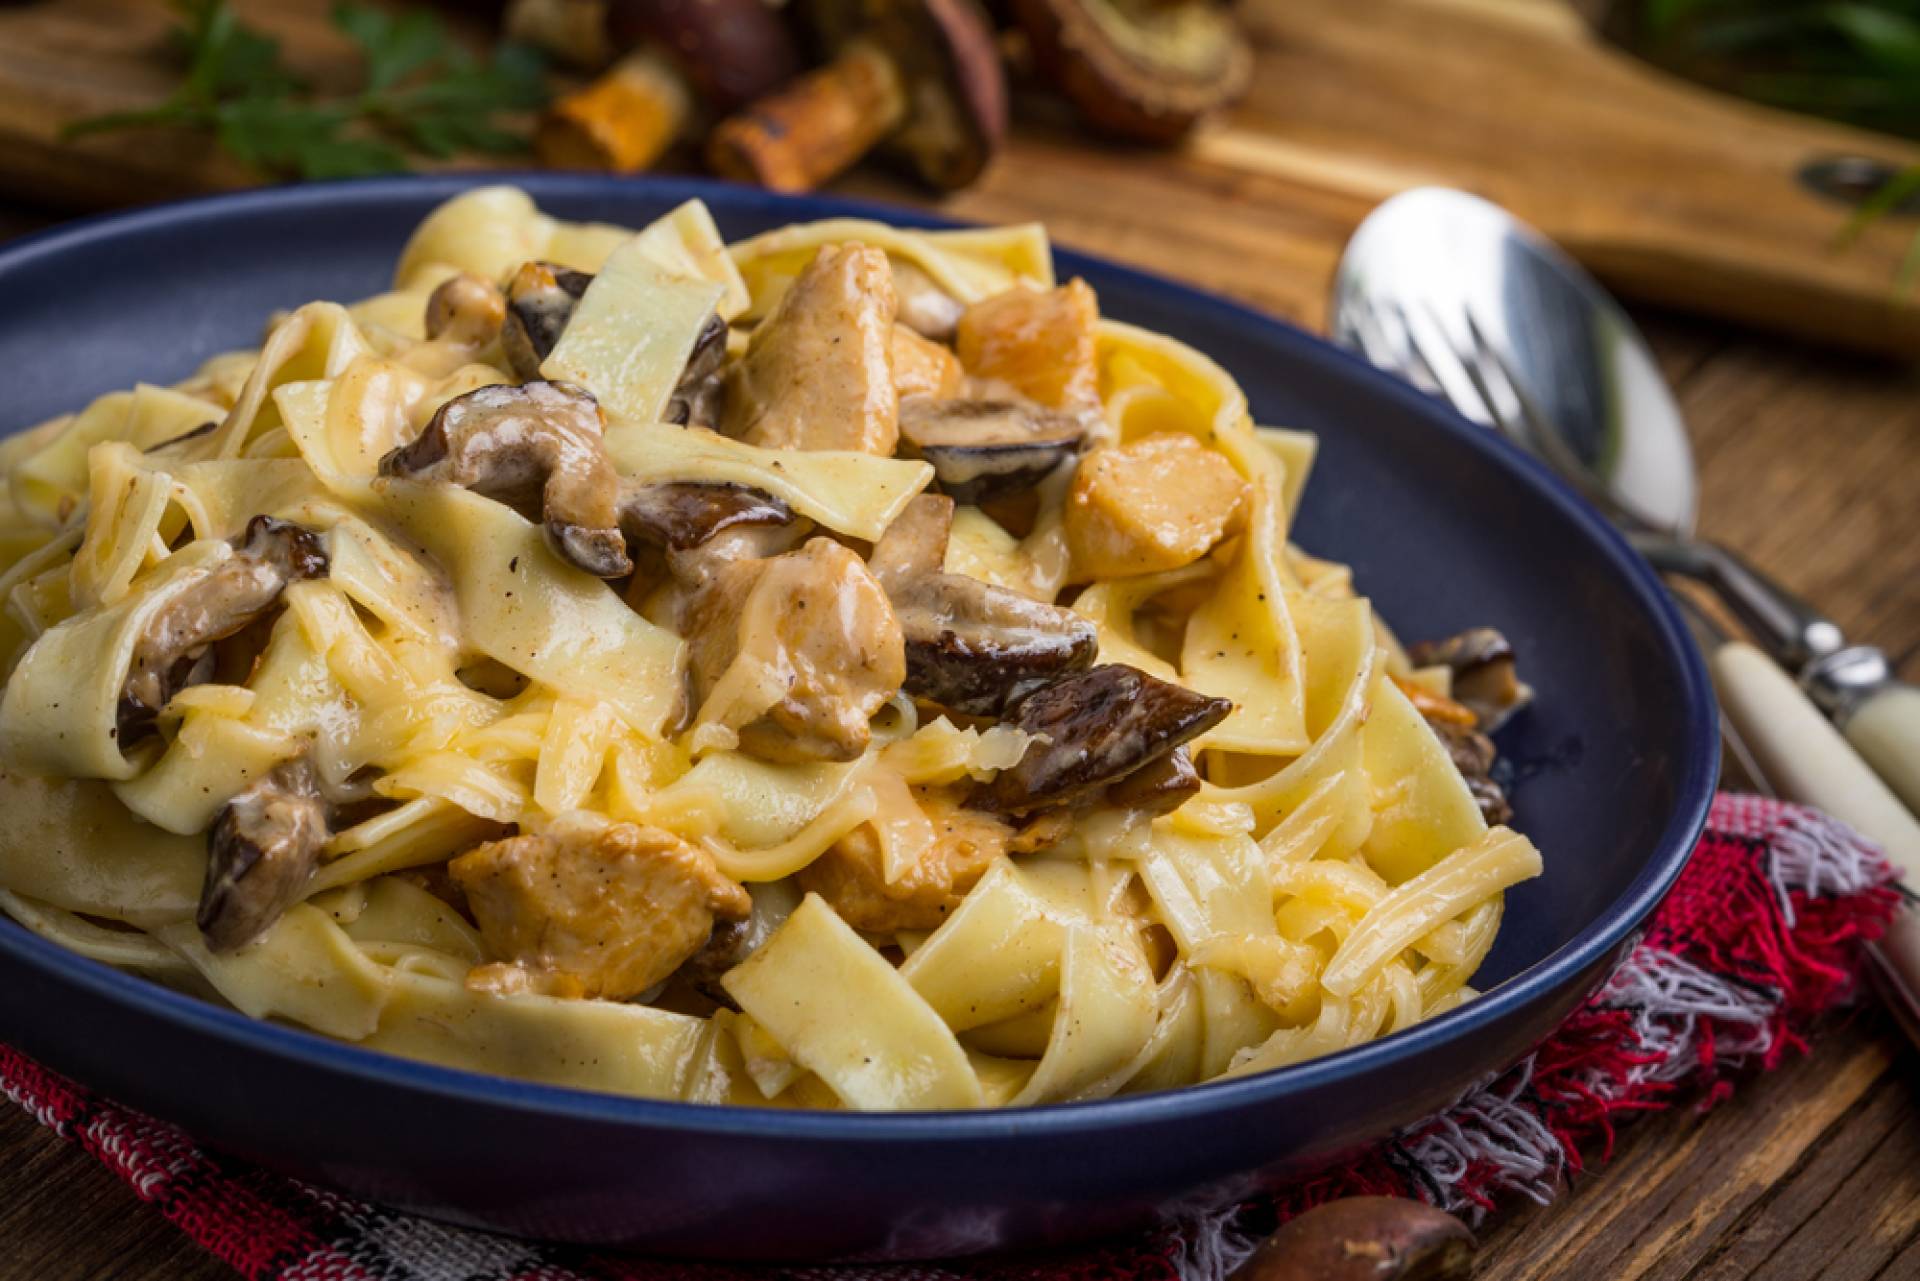 Dijon Chicken & Mushrooms with Buttered Noodles